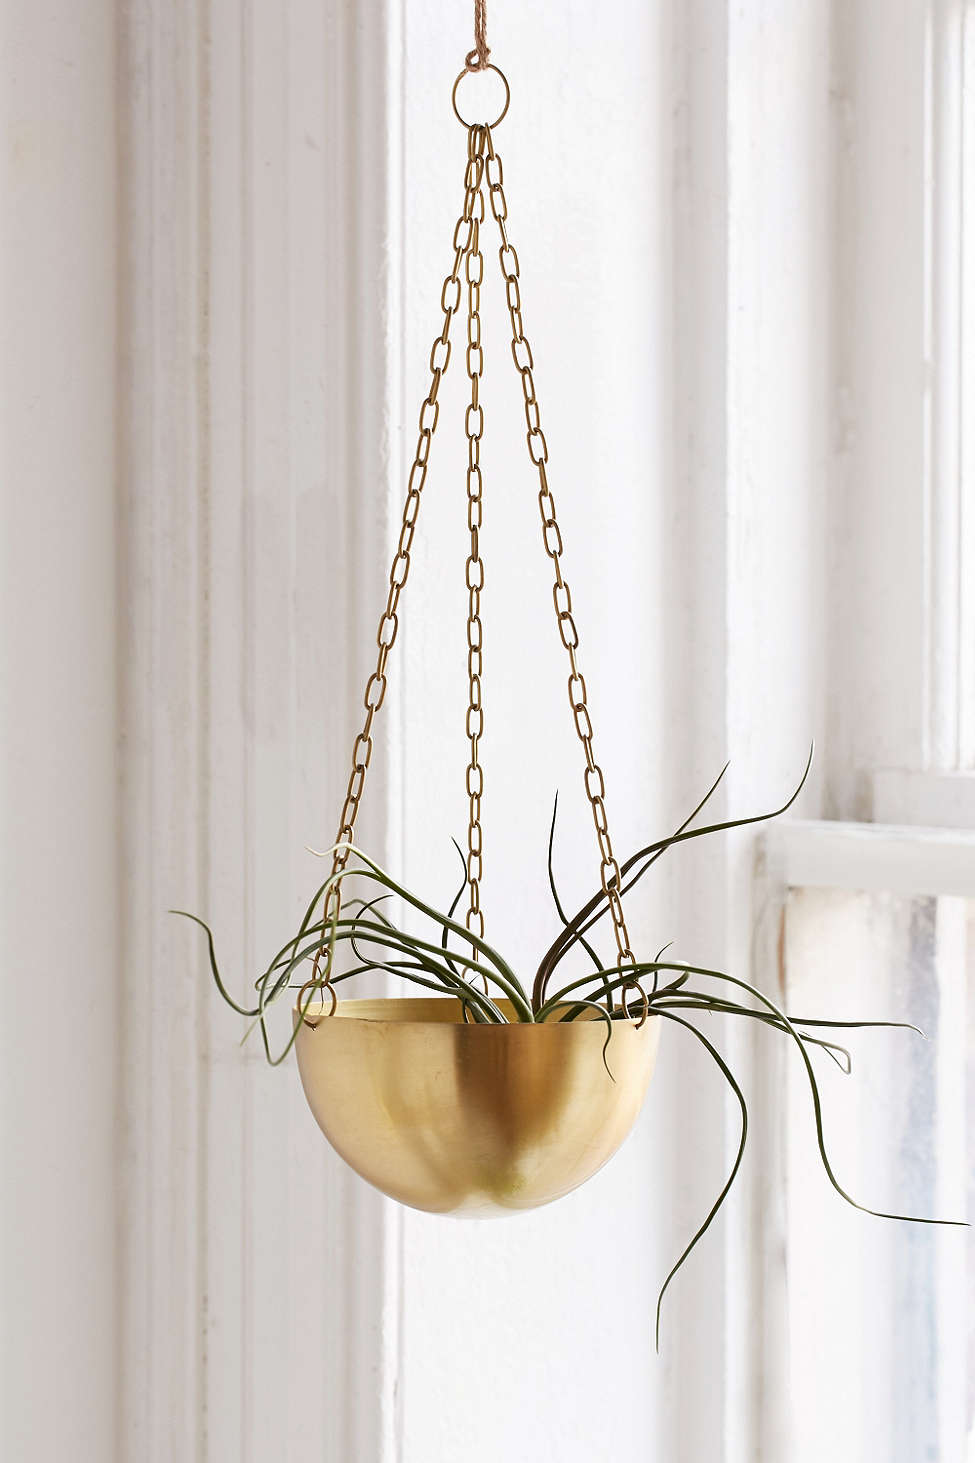 Hanging metal planter from Urban Outfitters